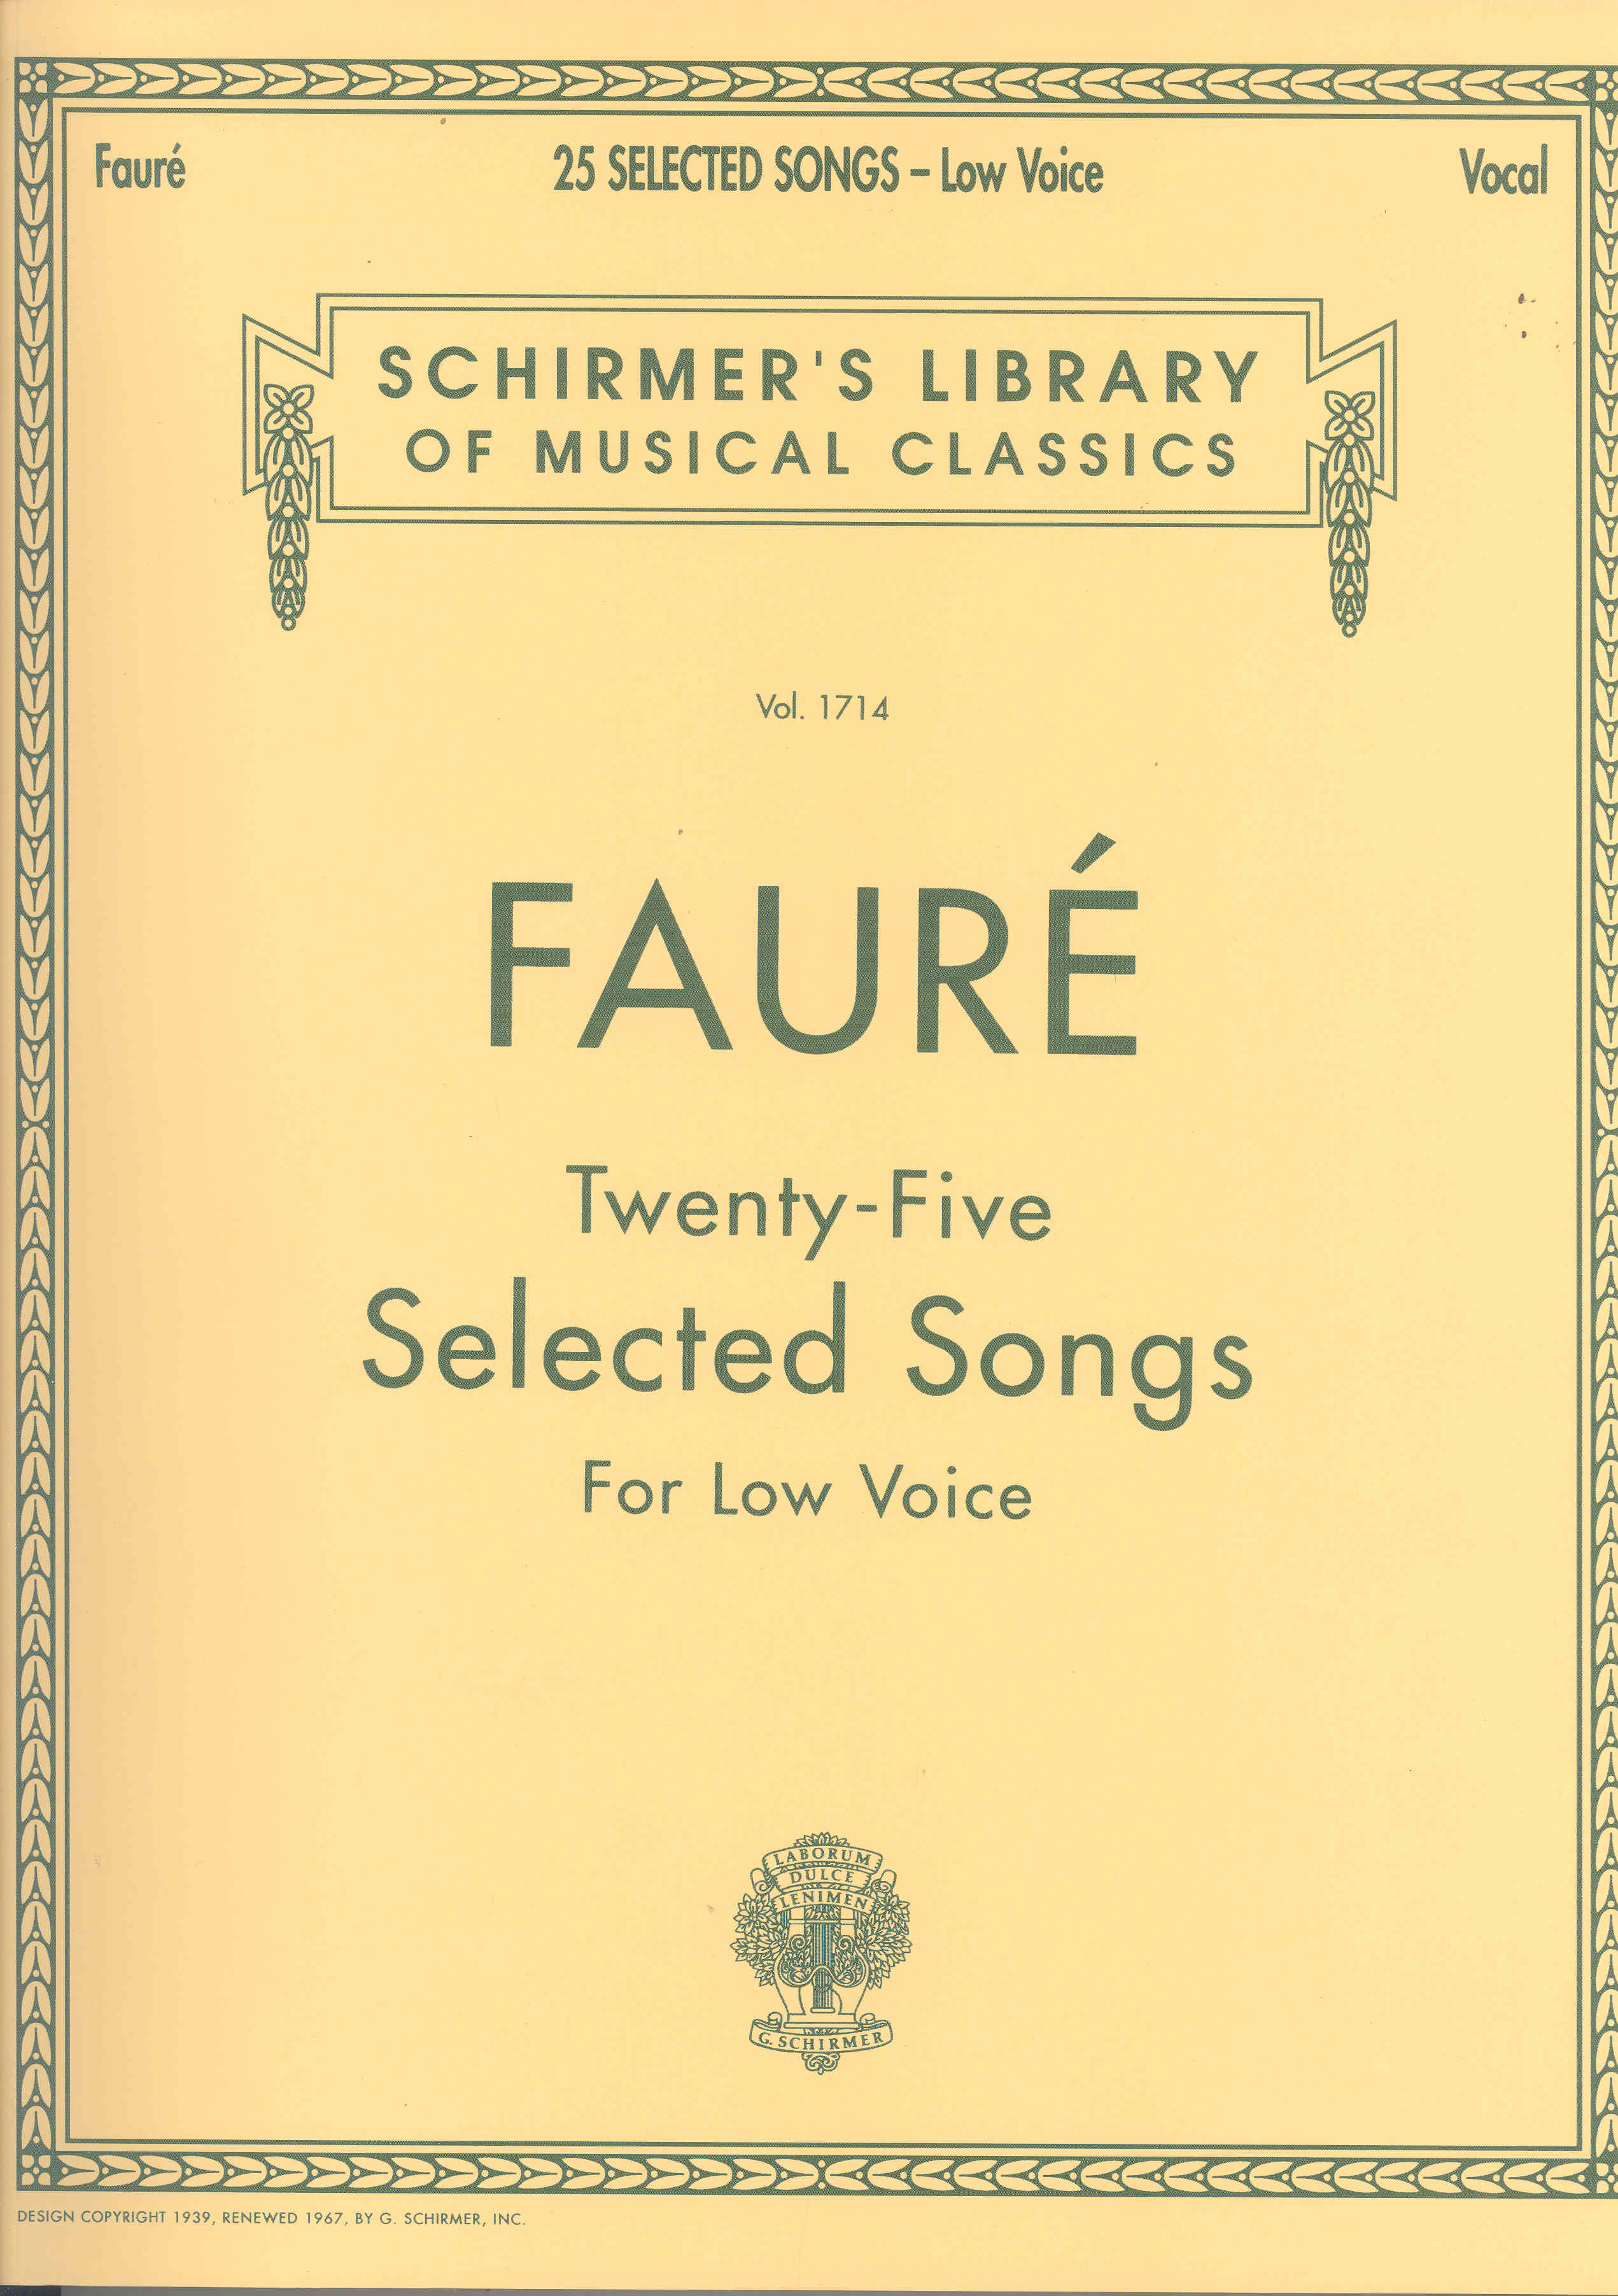 Faure 25 Selected Songs Low Voice Sheet Music Songbook